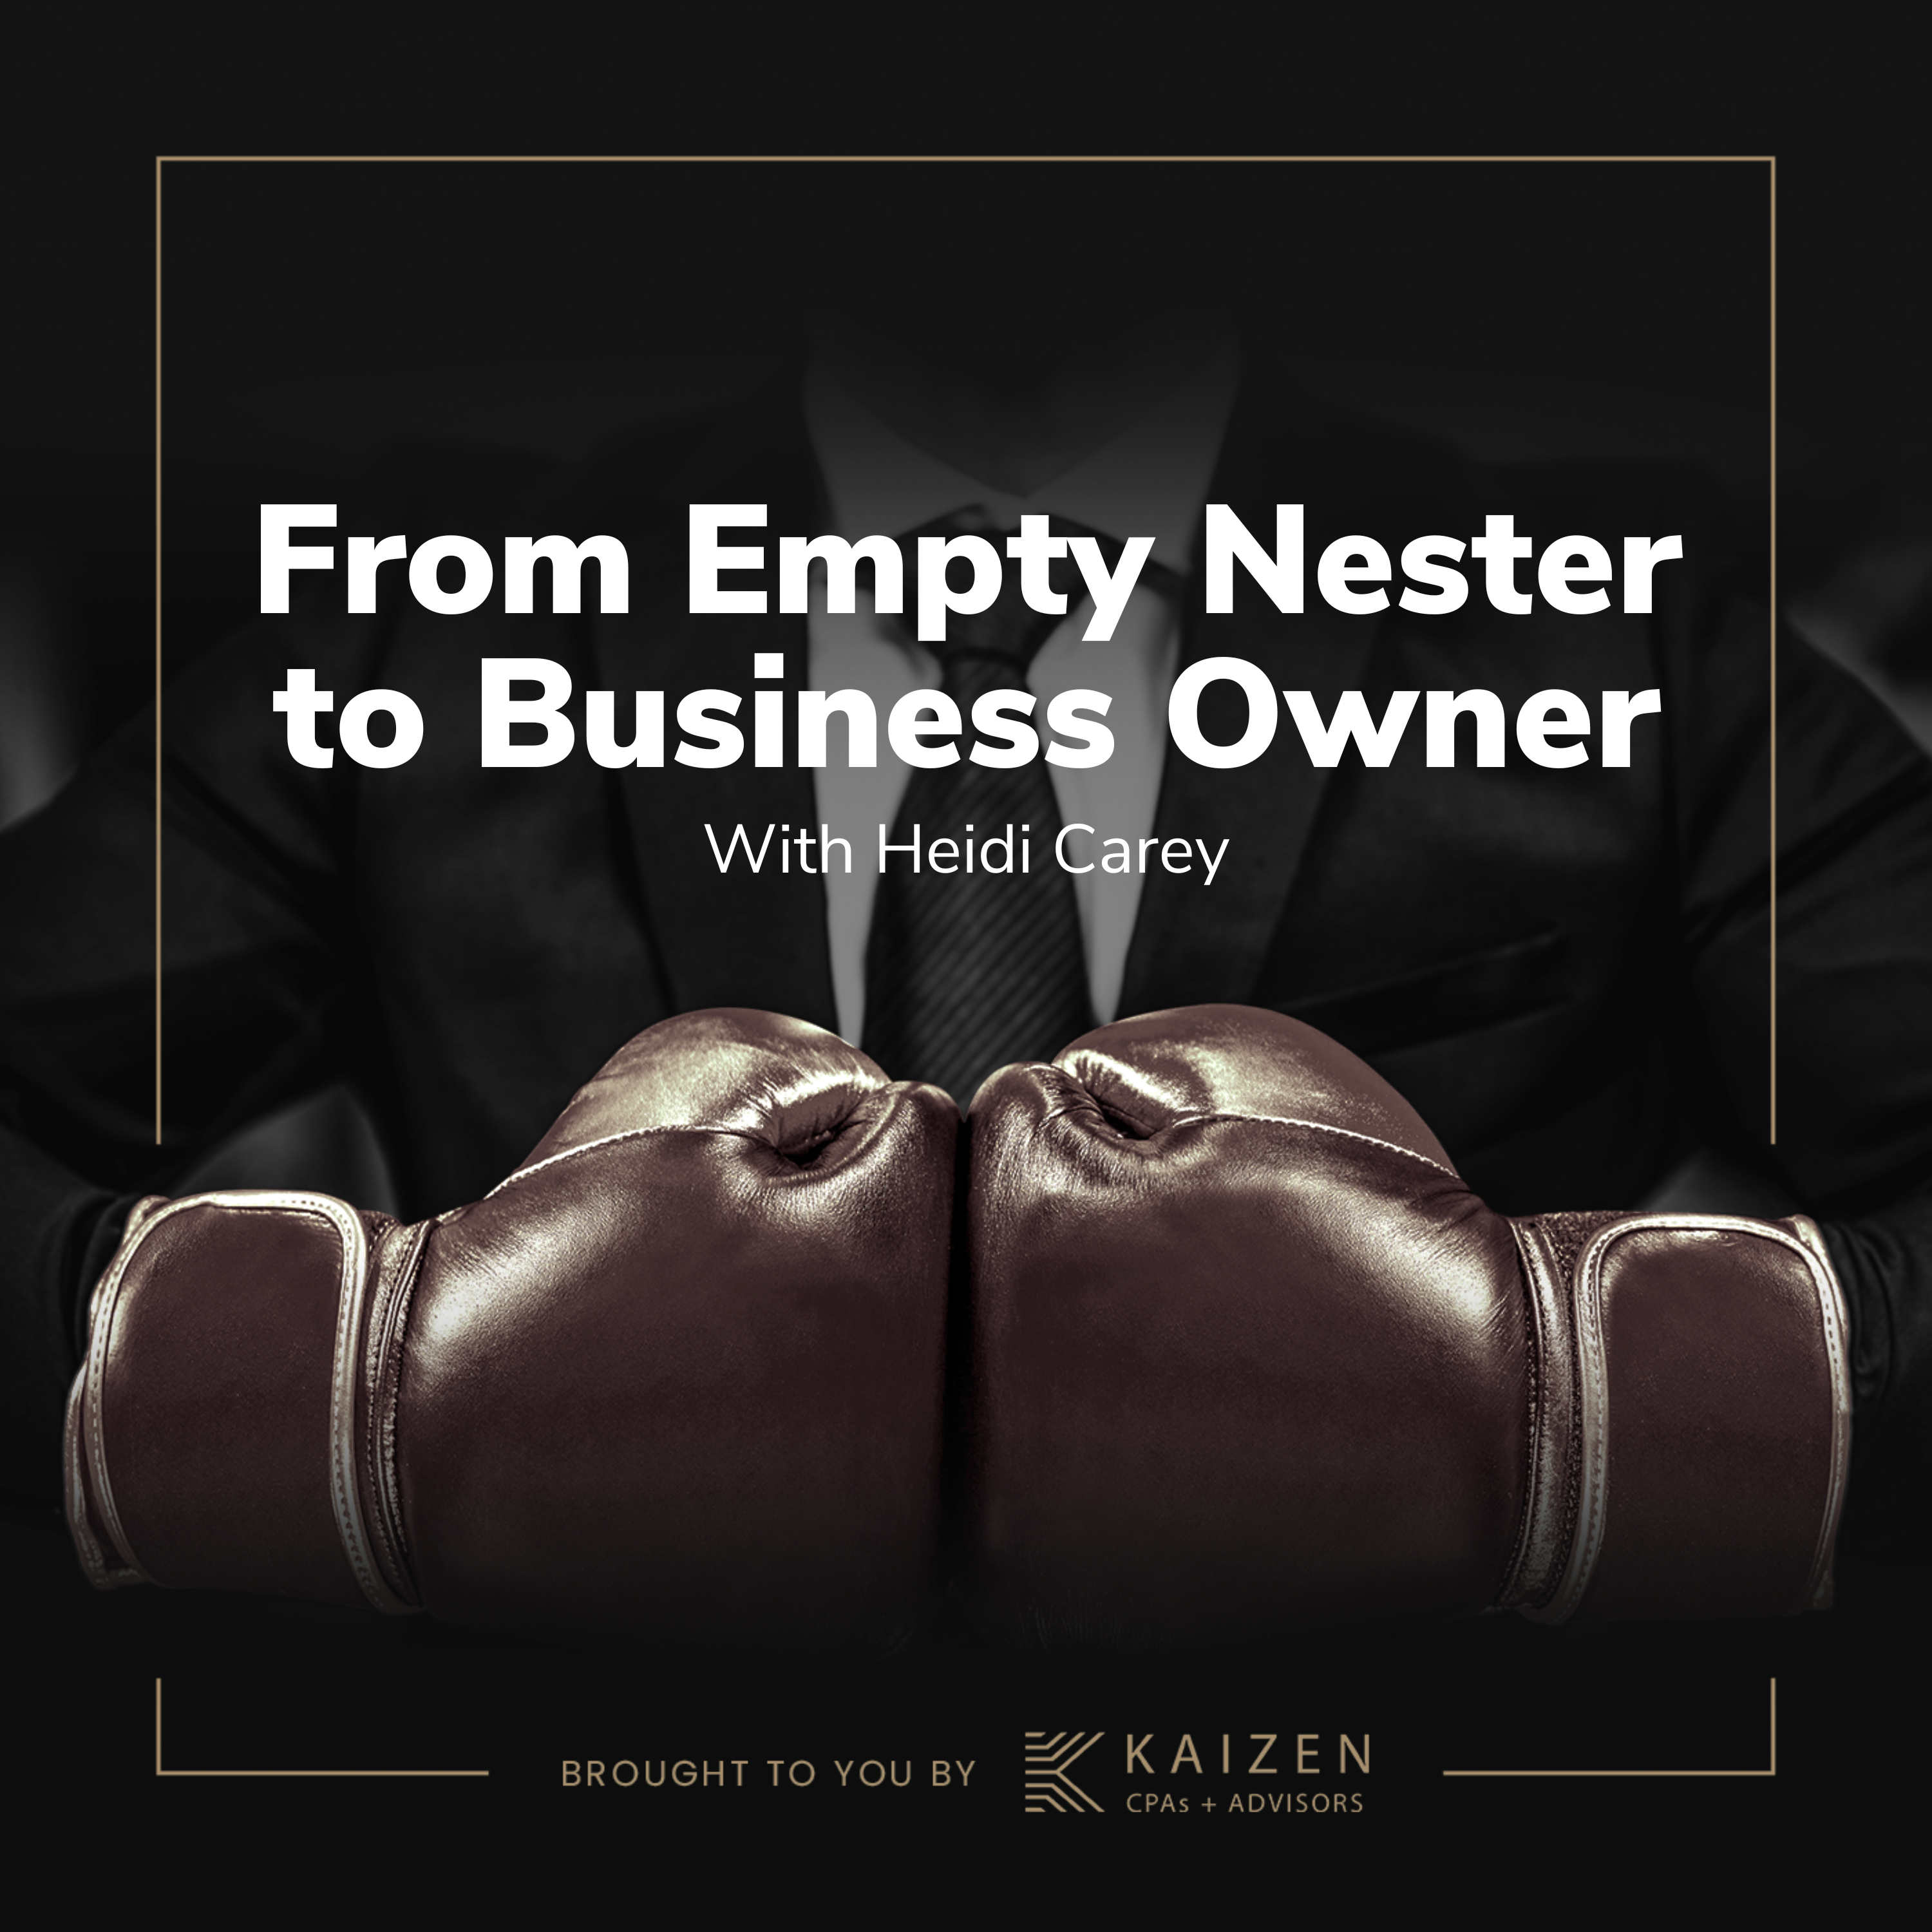 From empty nester to business owner